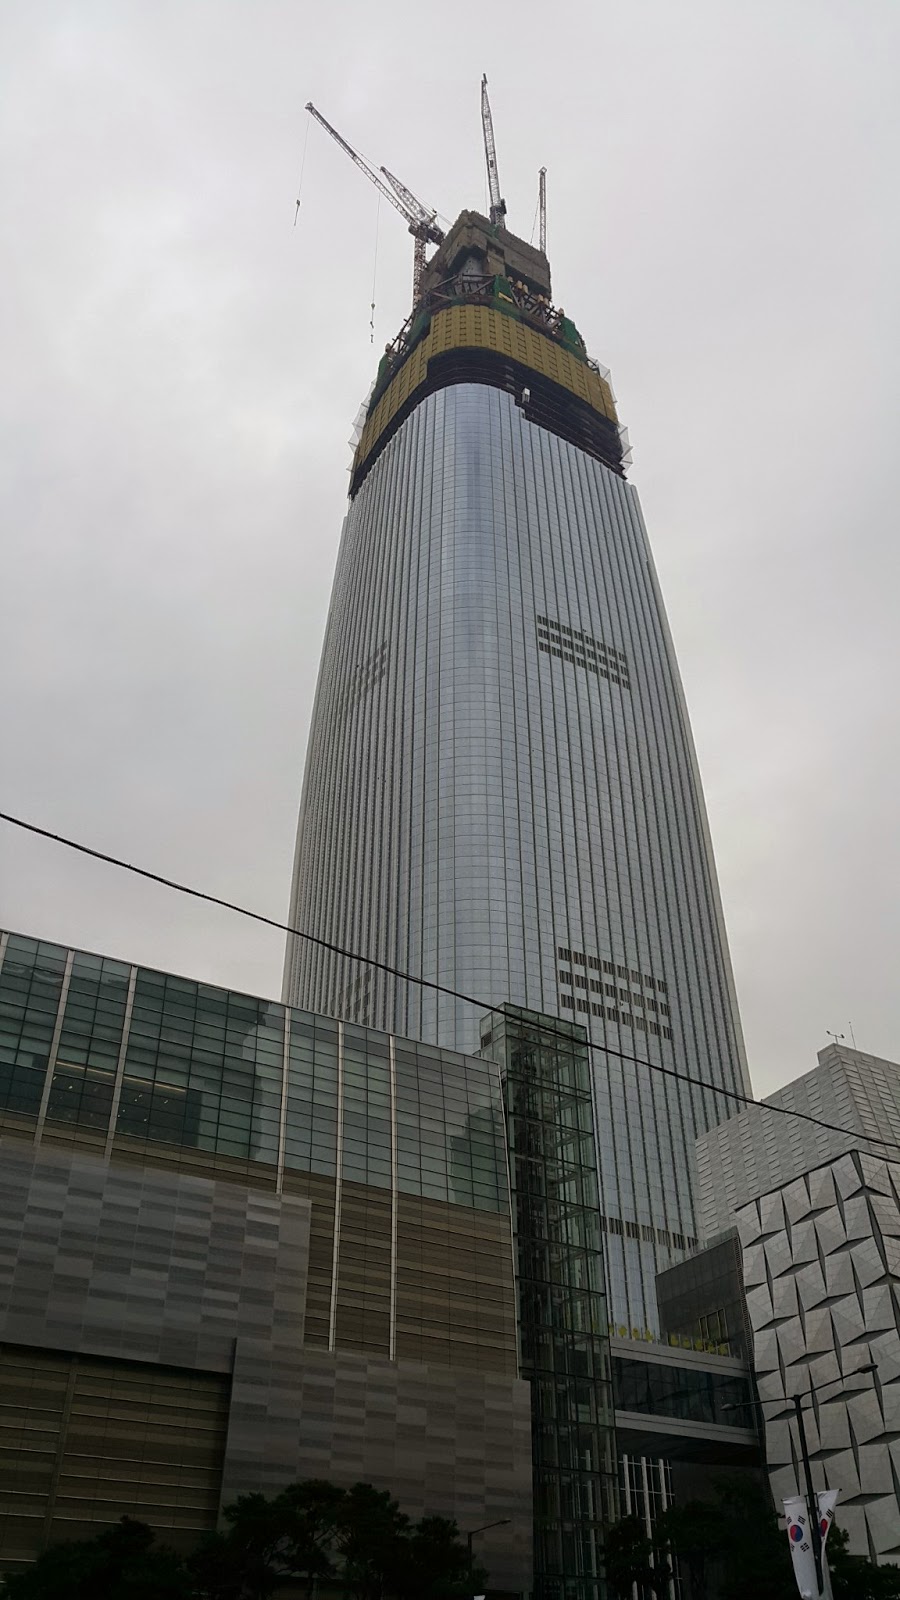 Tallest building in Seoul